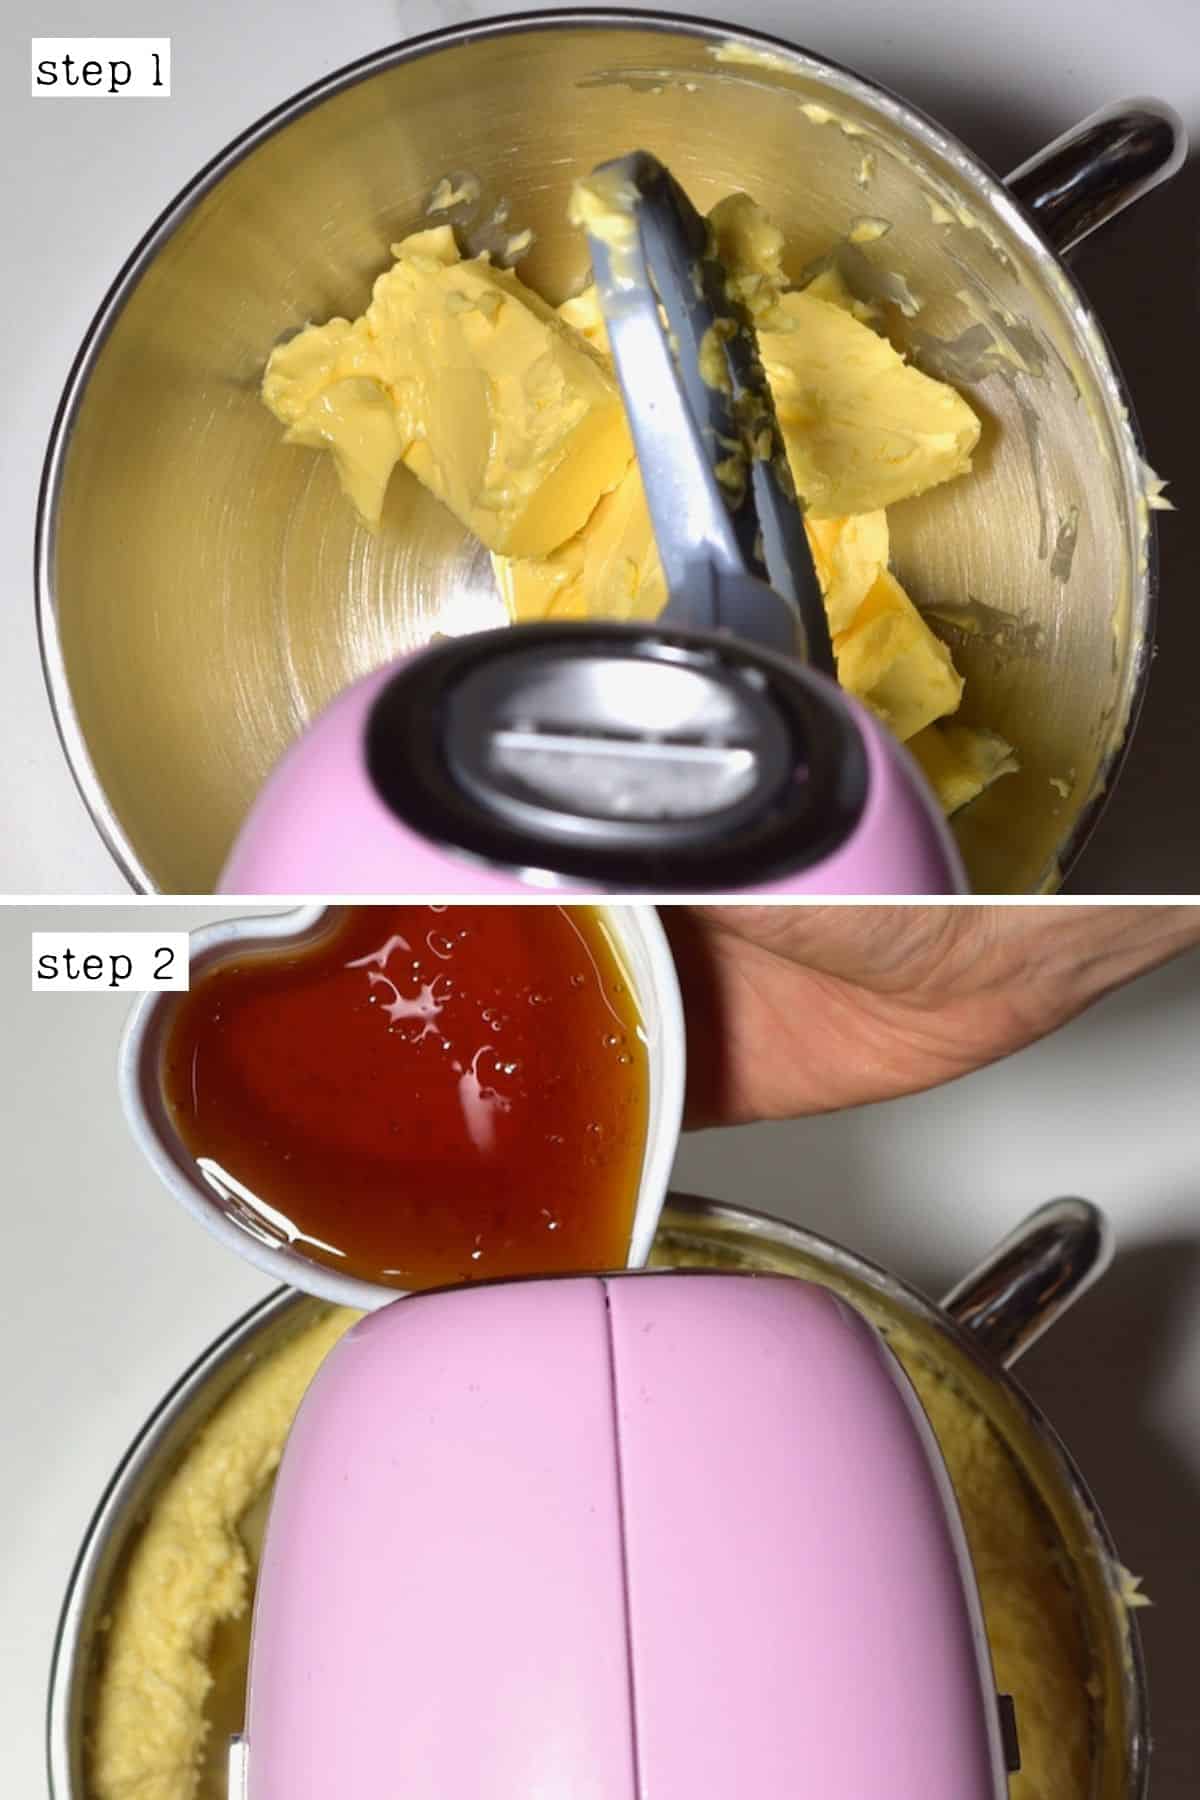 Steps for mixing butter sugar and golden syrup